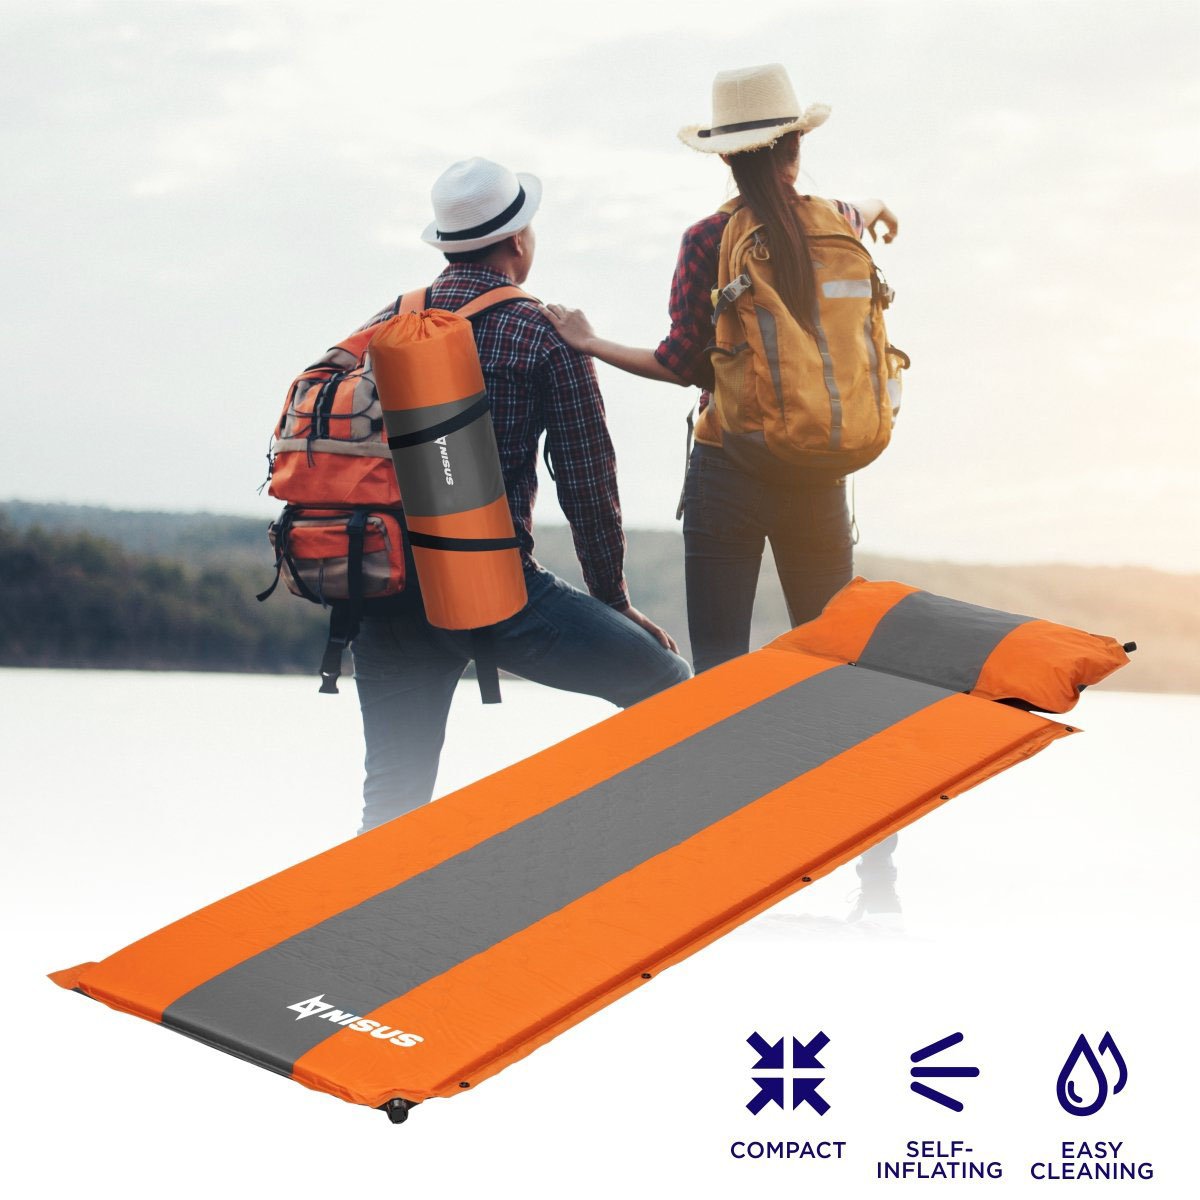 Orange Self Inflating Sleeping Pad with Pillow is lightweight and compact, perfect for outdoor trips